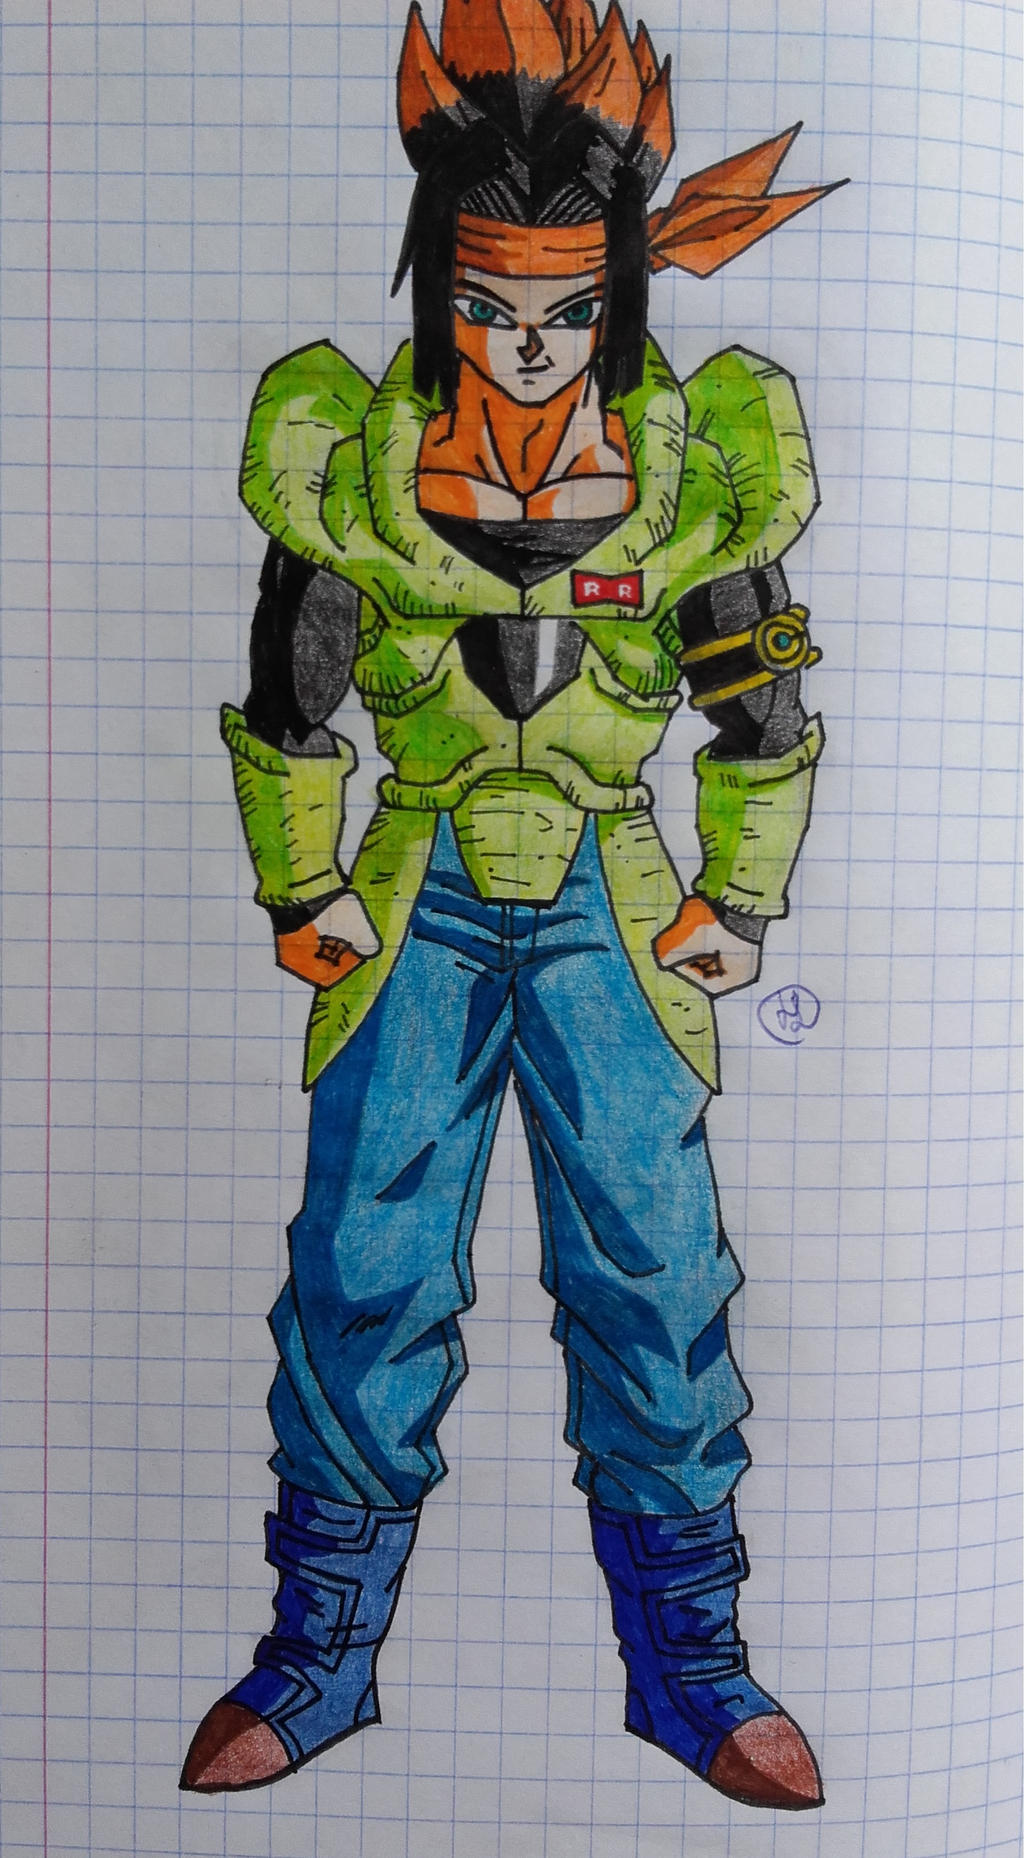 Android 17 (Age 780) (Dragon Ball Super) by NeoOllice on DeviantArt